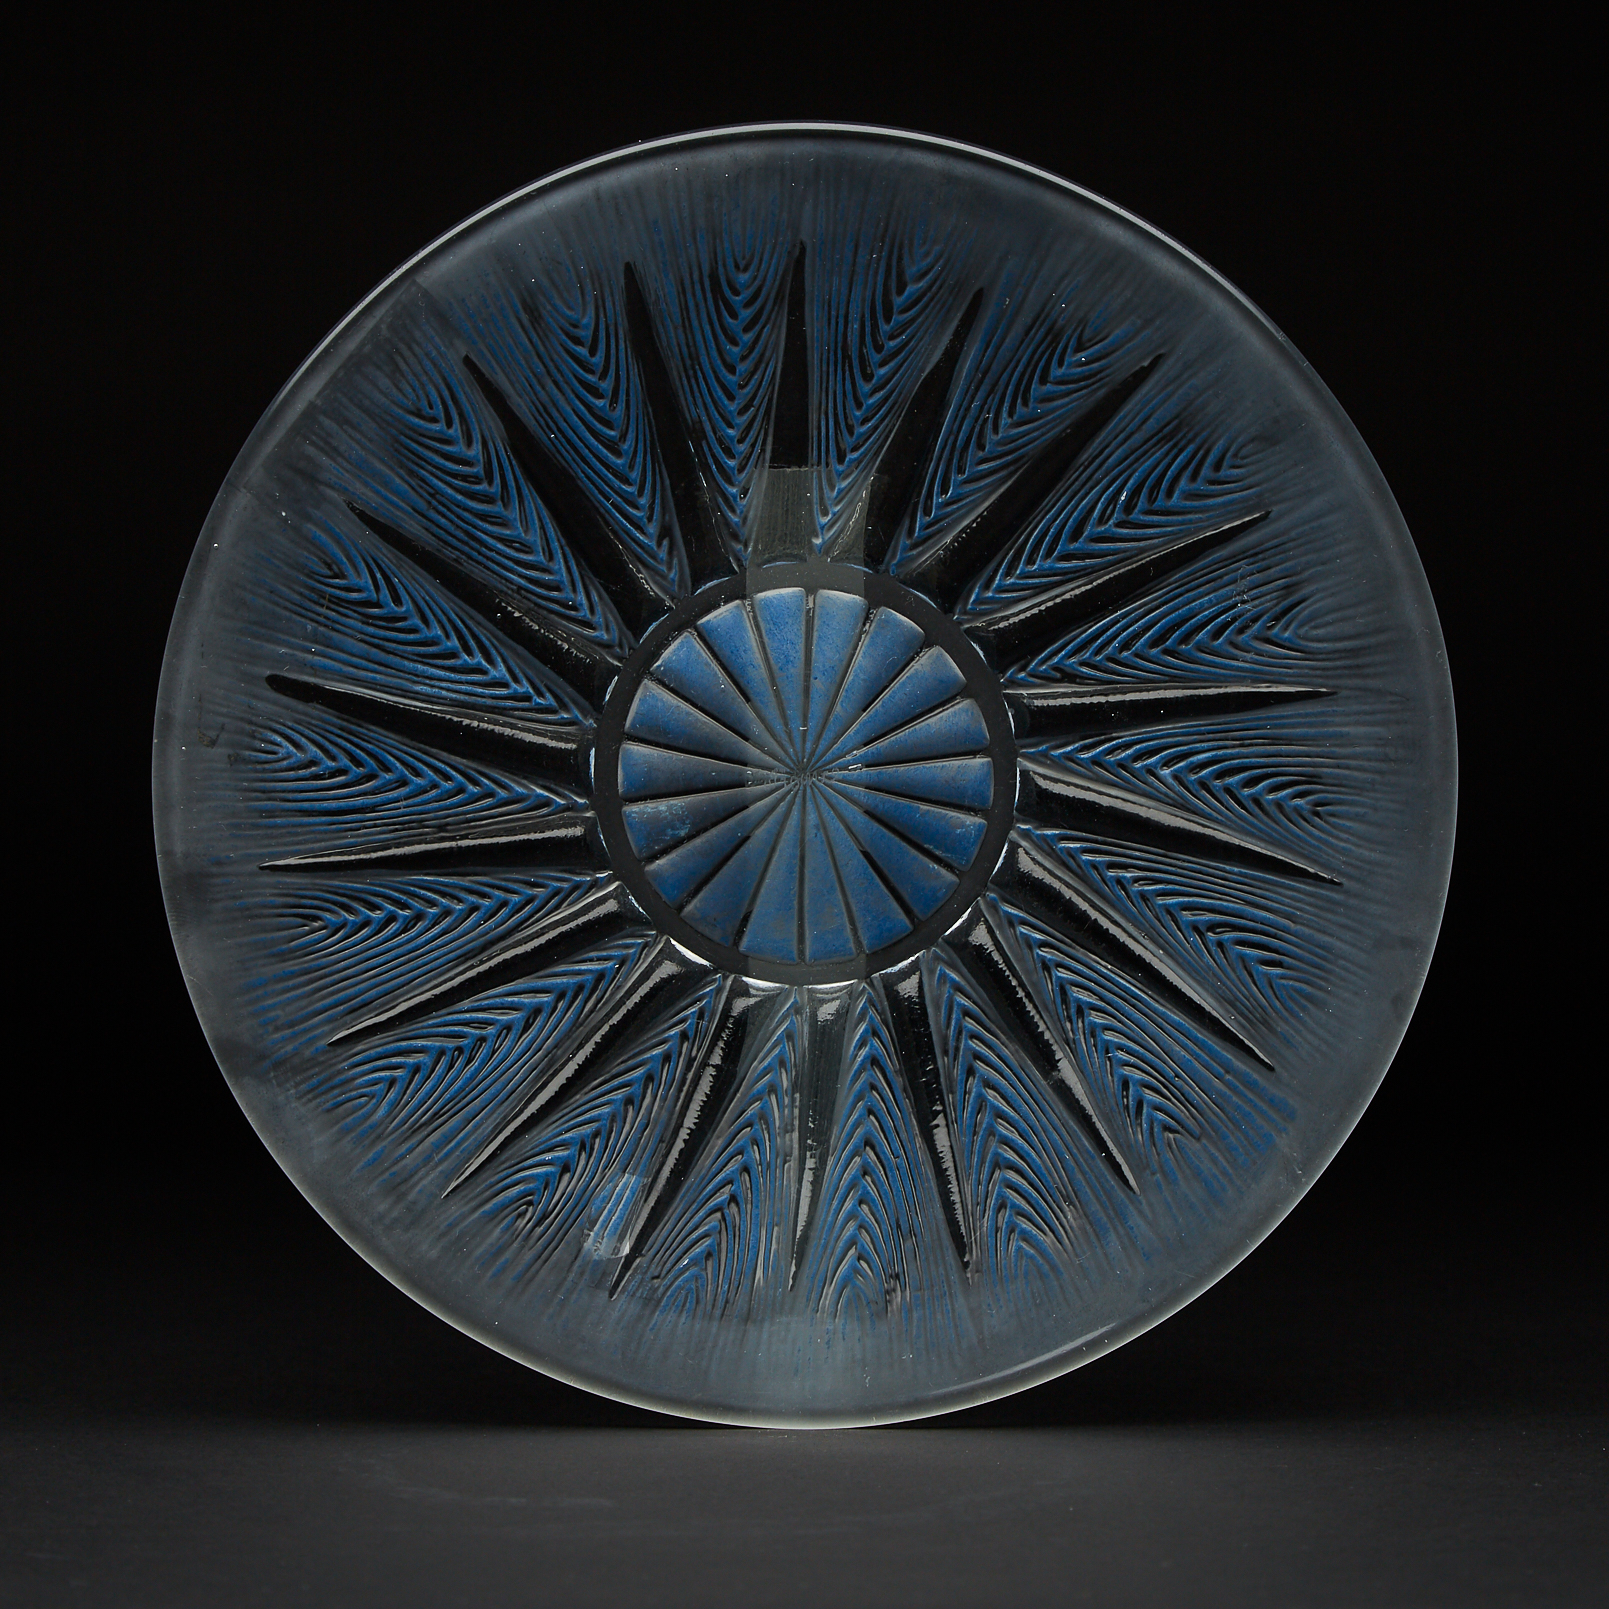 'Epis', Lalique Moulded and Enameled Glass Plate, c.1930